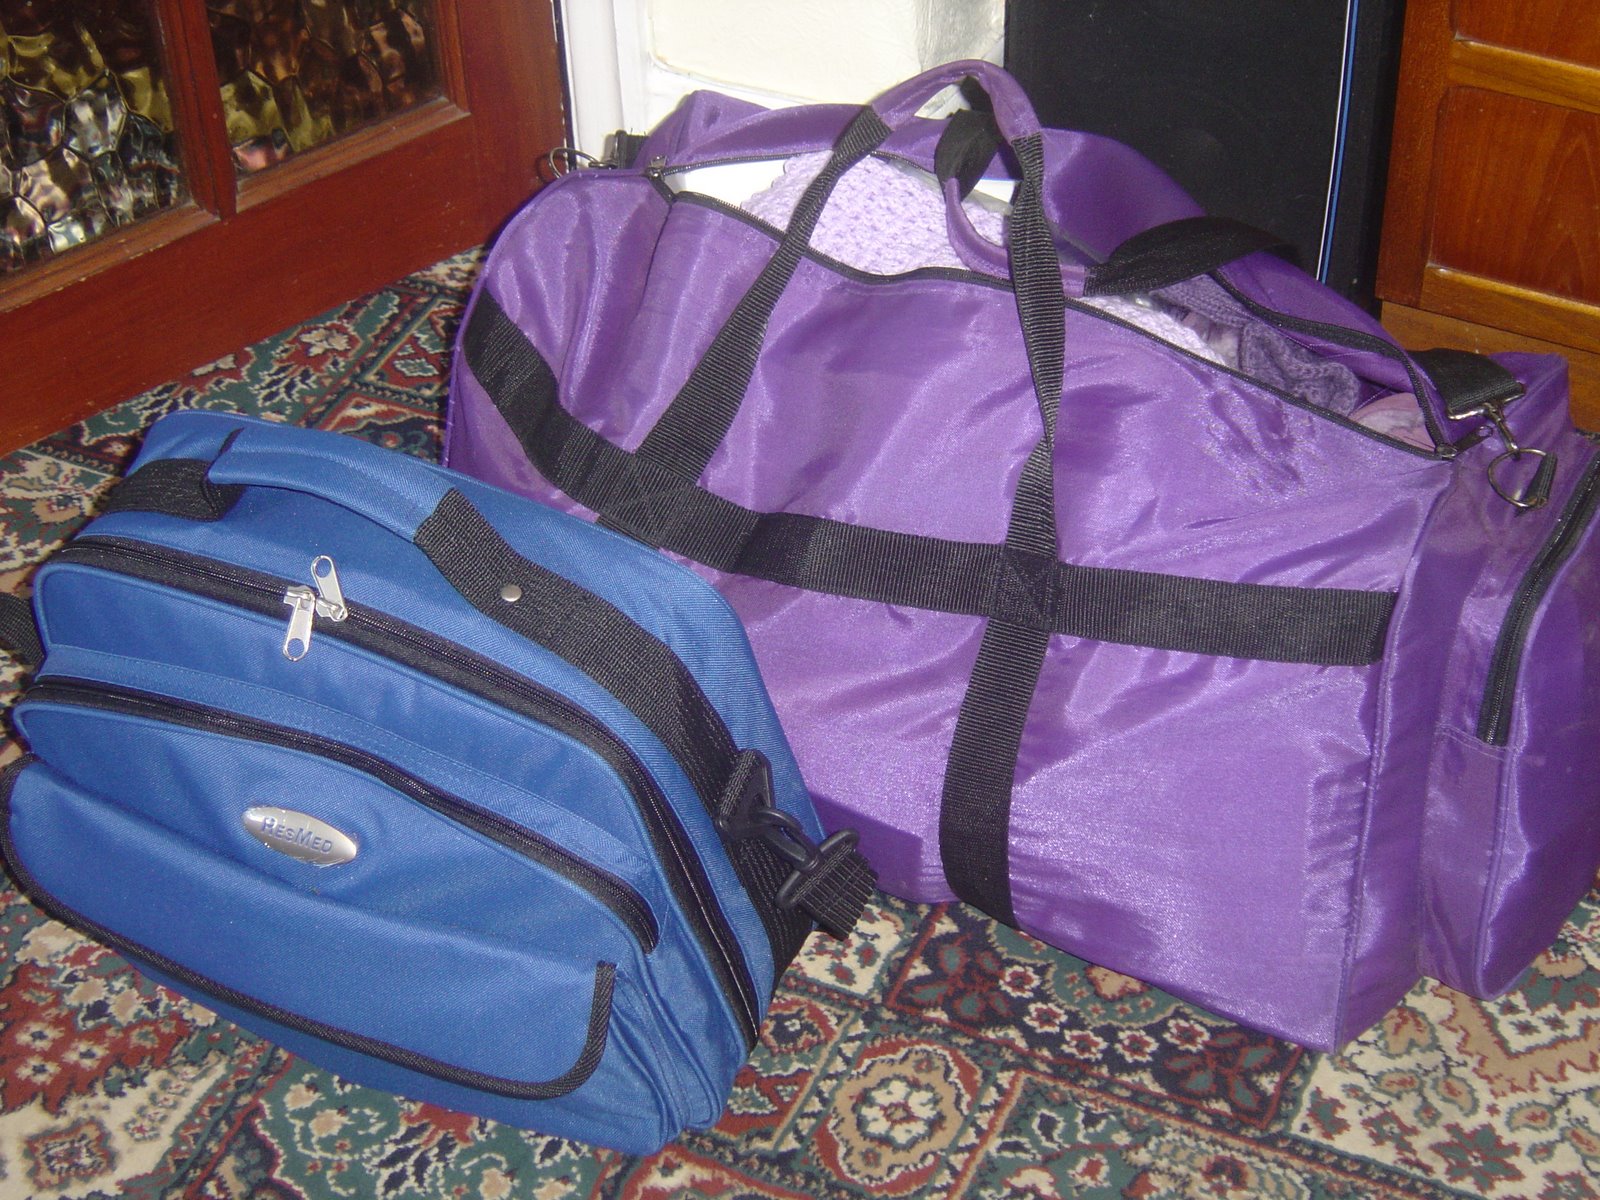 [My+bags+are+packed+002.JPG]